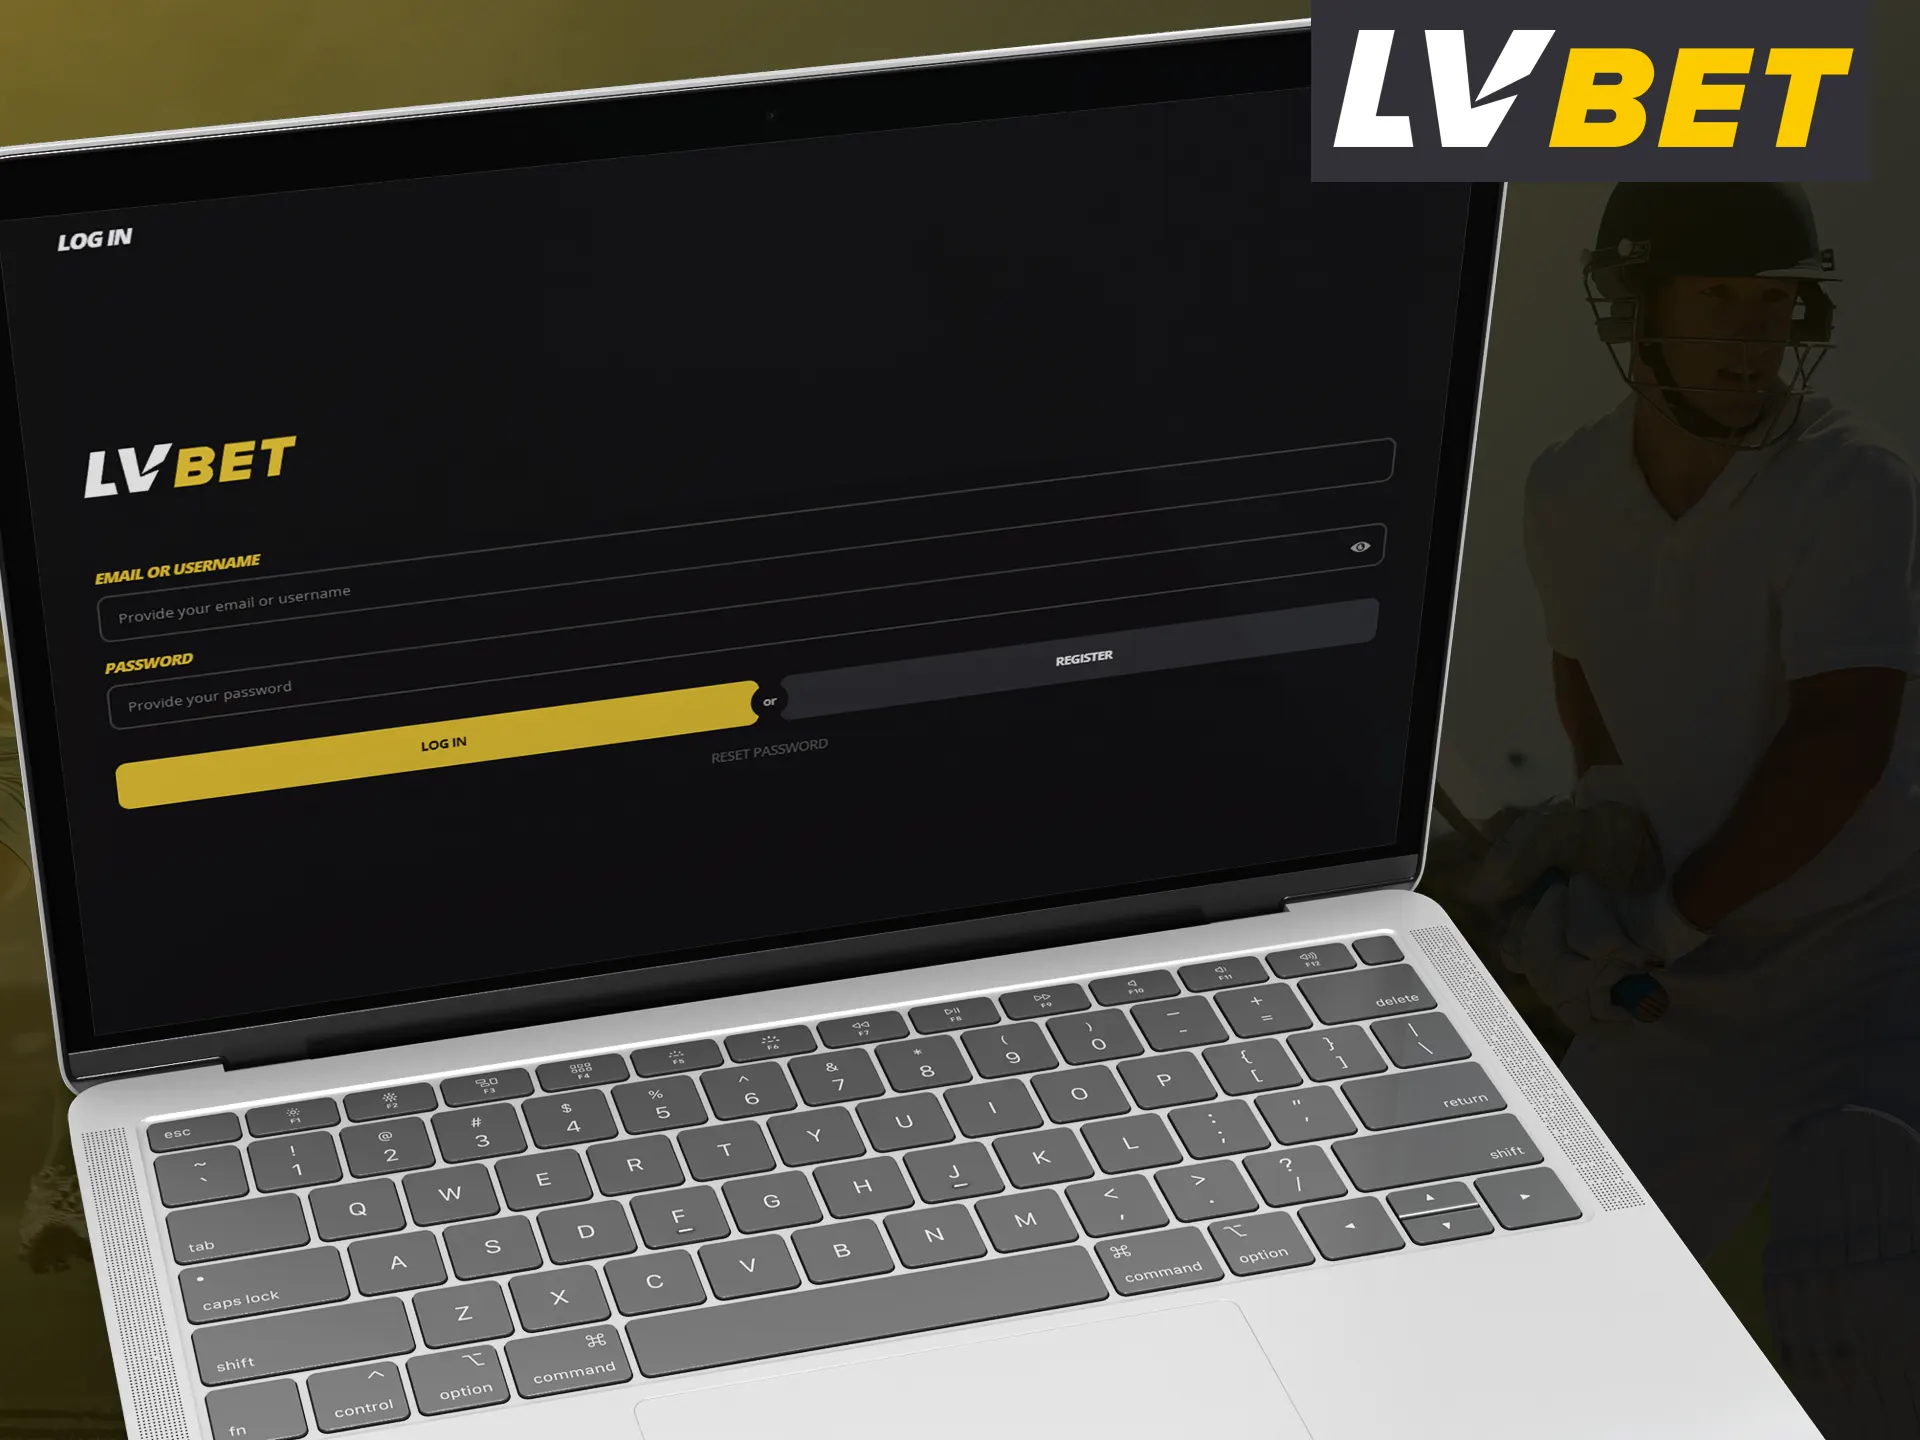 Log in to your LV Bet account to access all features.